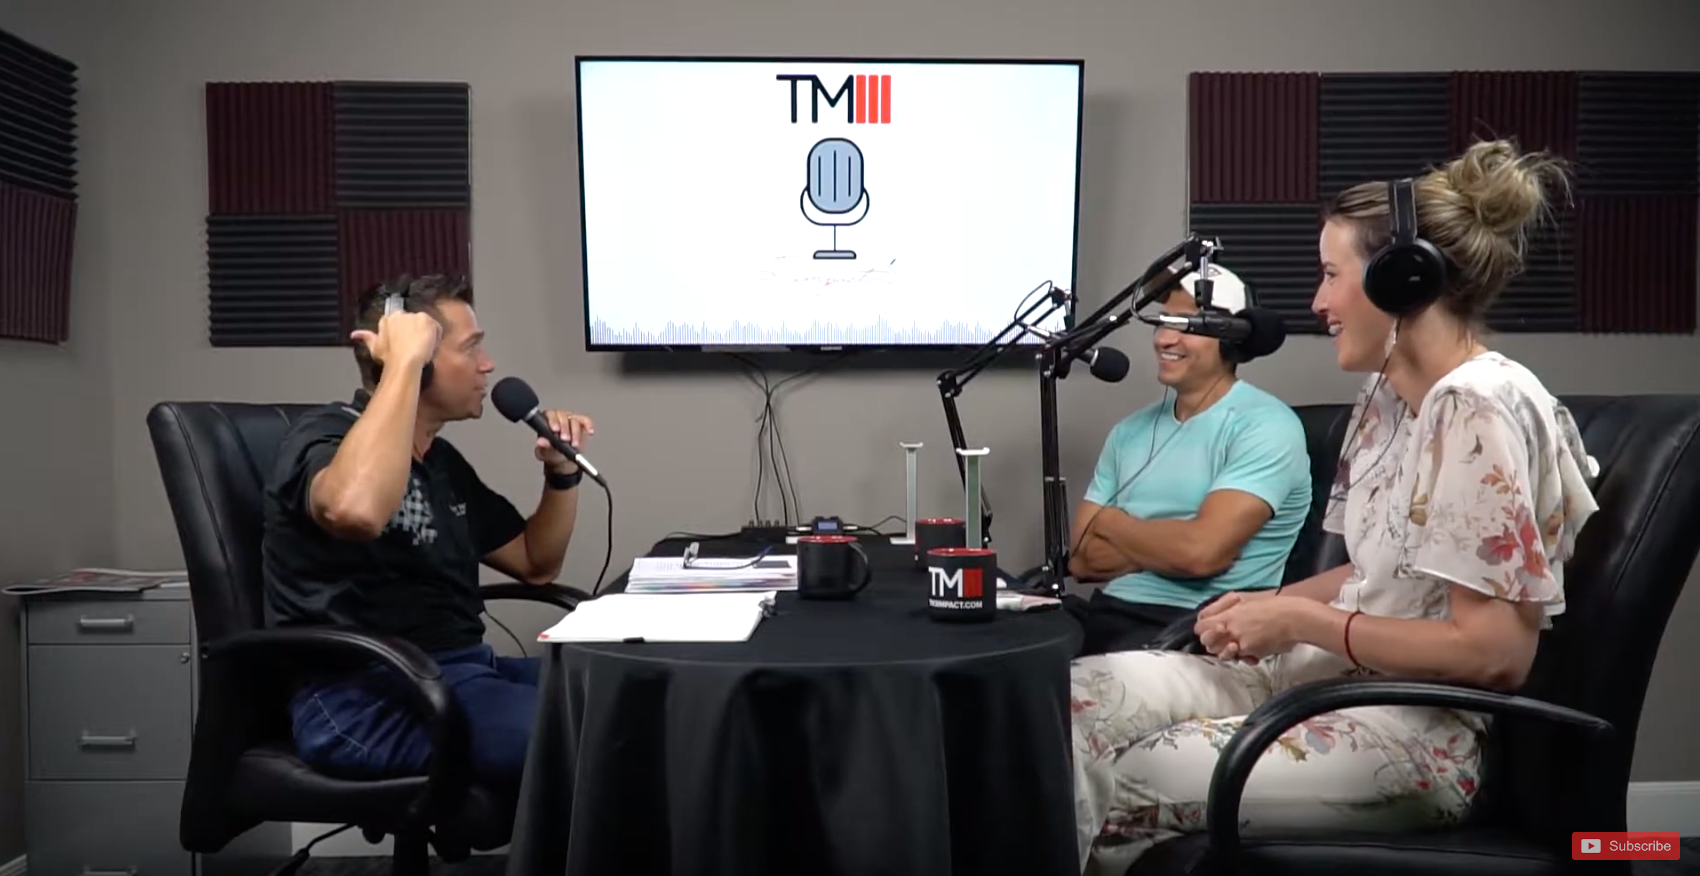 Take a listen: Orlando and I’s appearance on the TM3Impact! Podcast